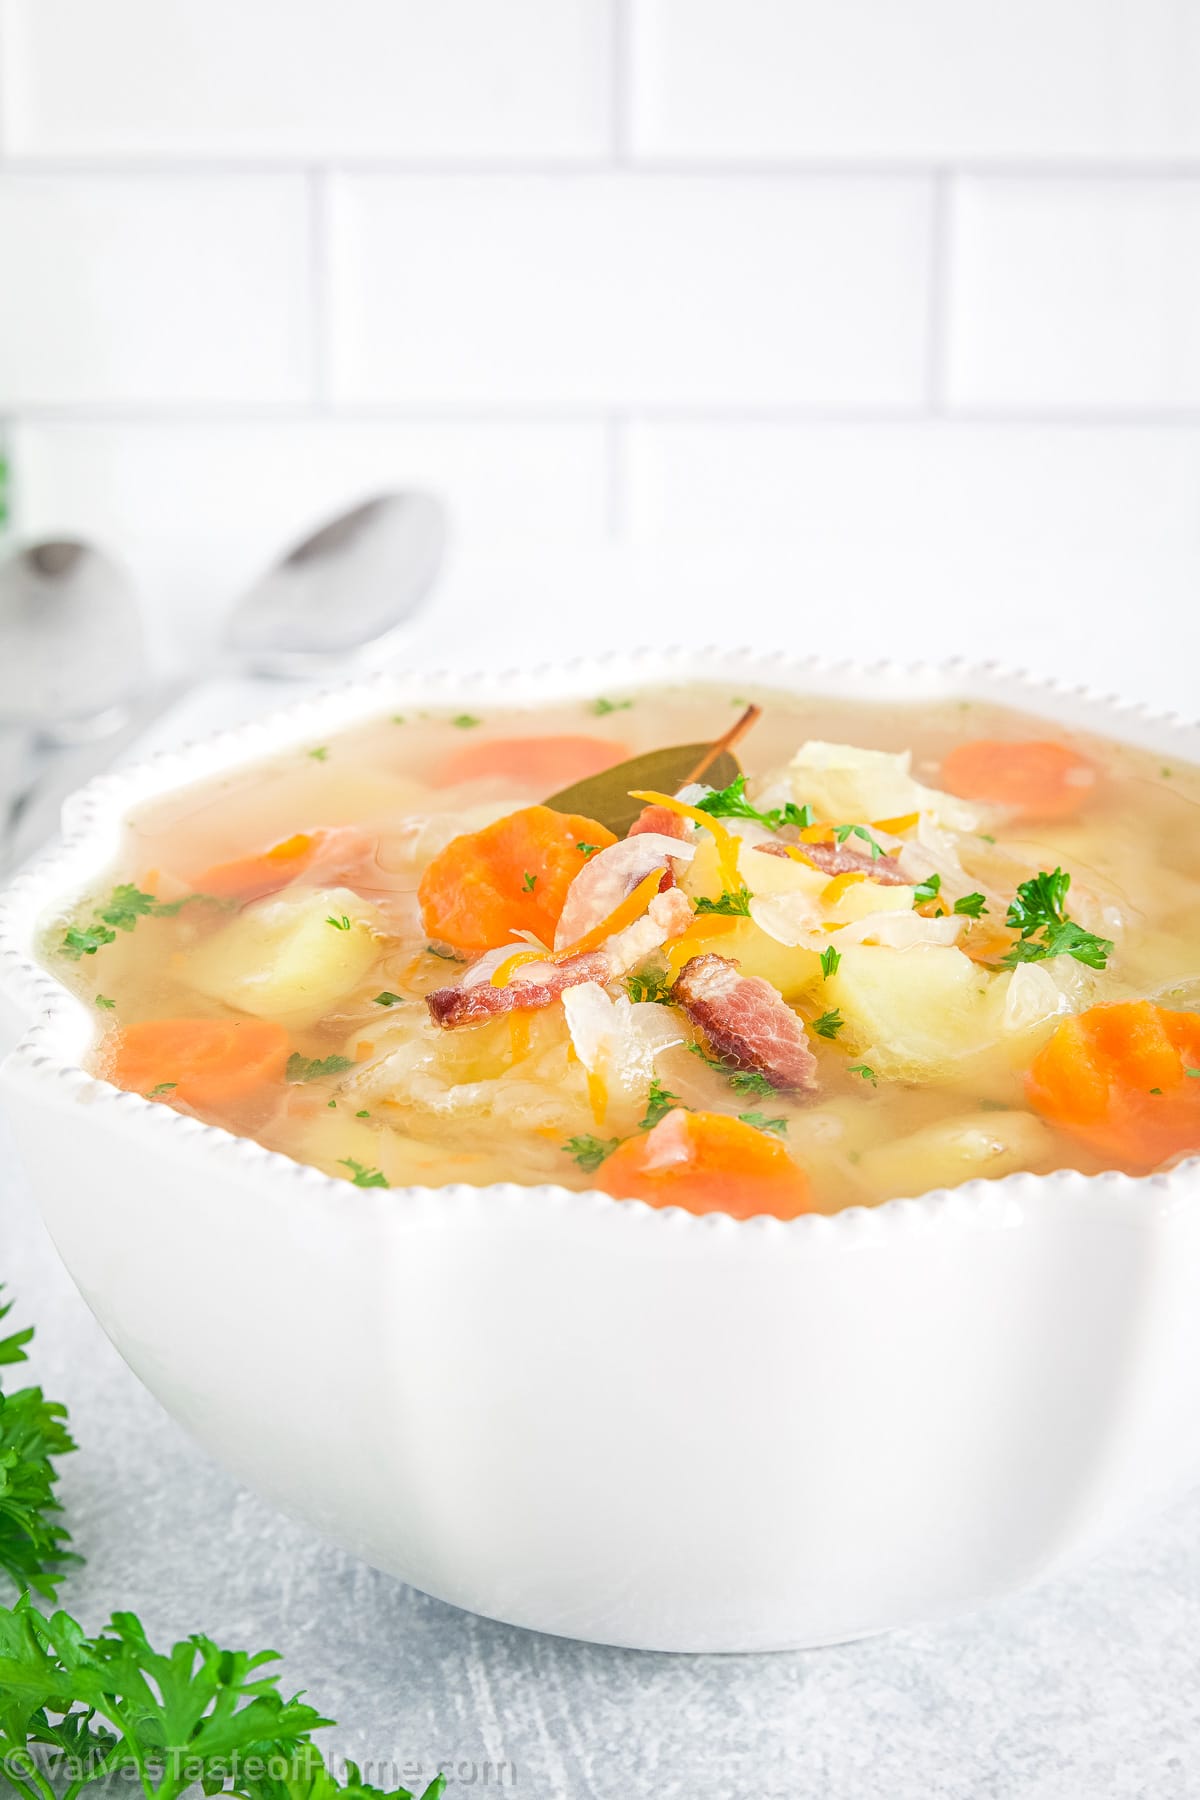 Known as Kapusniak in Ukraine, this traditional dish is perfect for home cooking. It is nourishing, flavorful, and easy to prepare, using common ingredients.